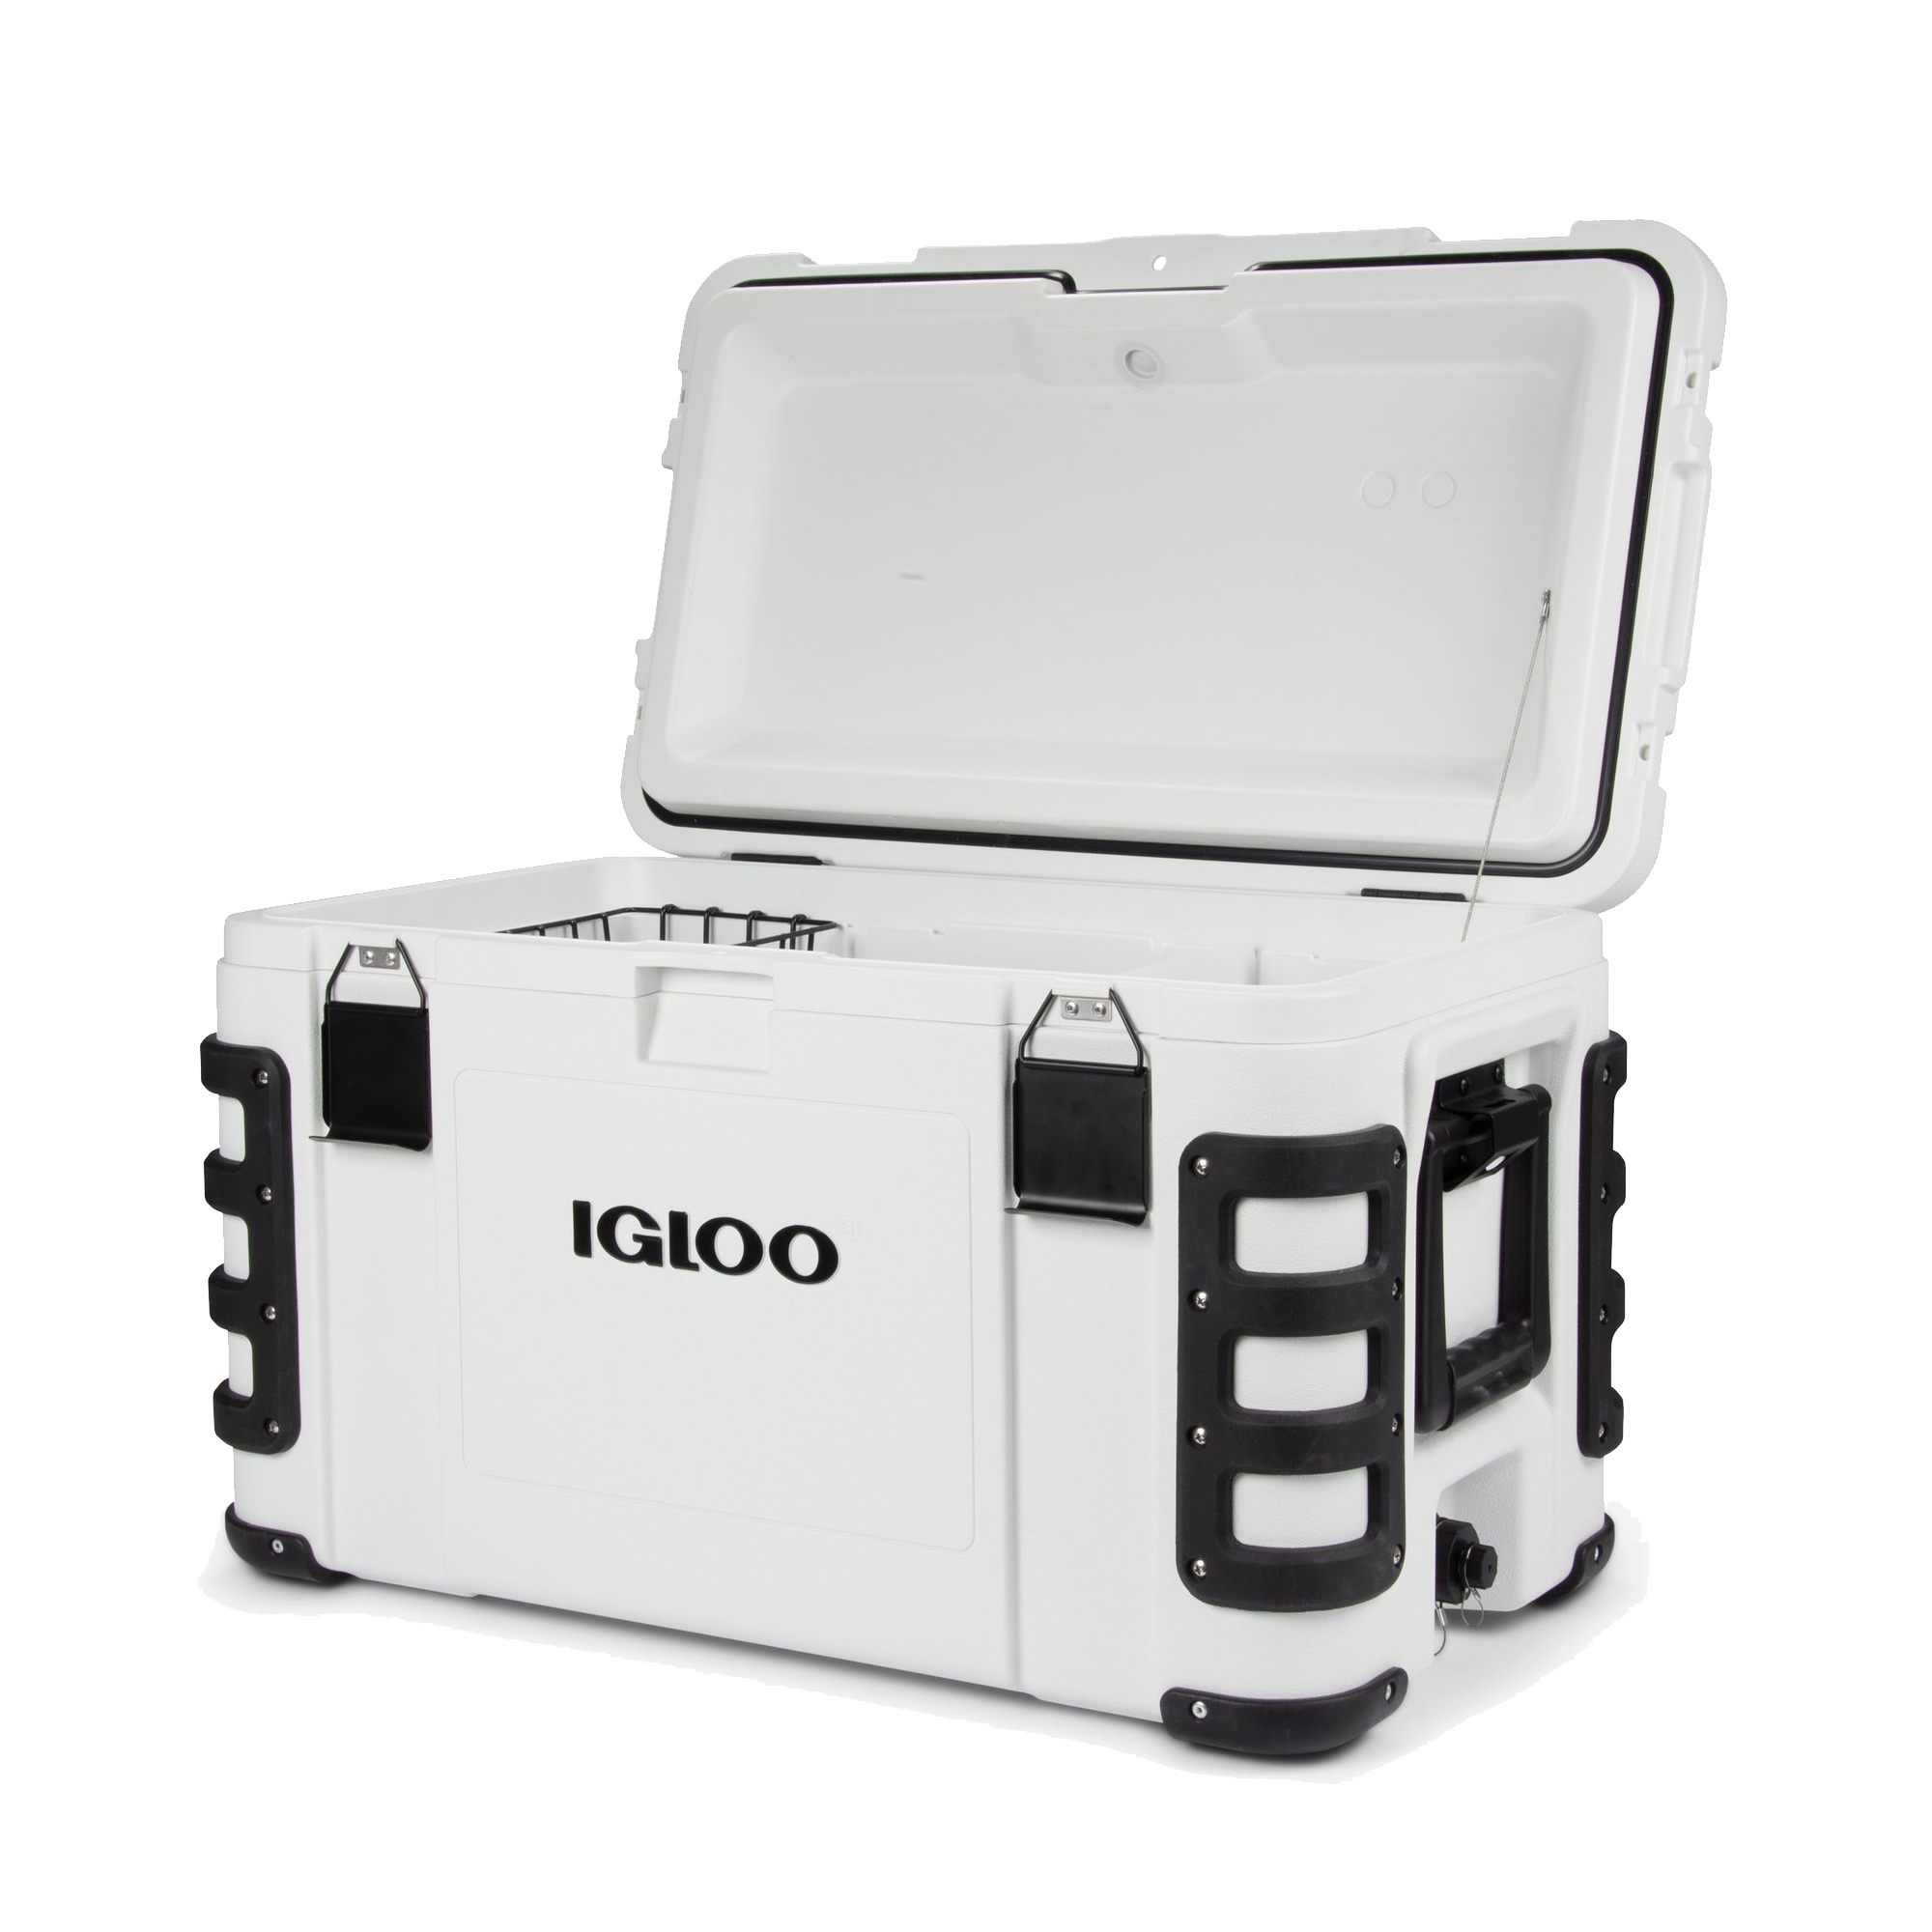 Igloo 50 qt. Hard Sided Ice Chest Cooler, White - image 5 of 8